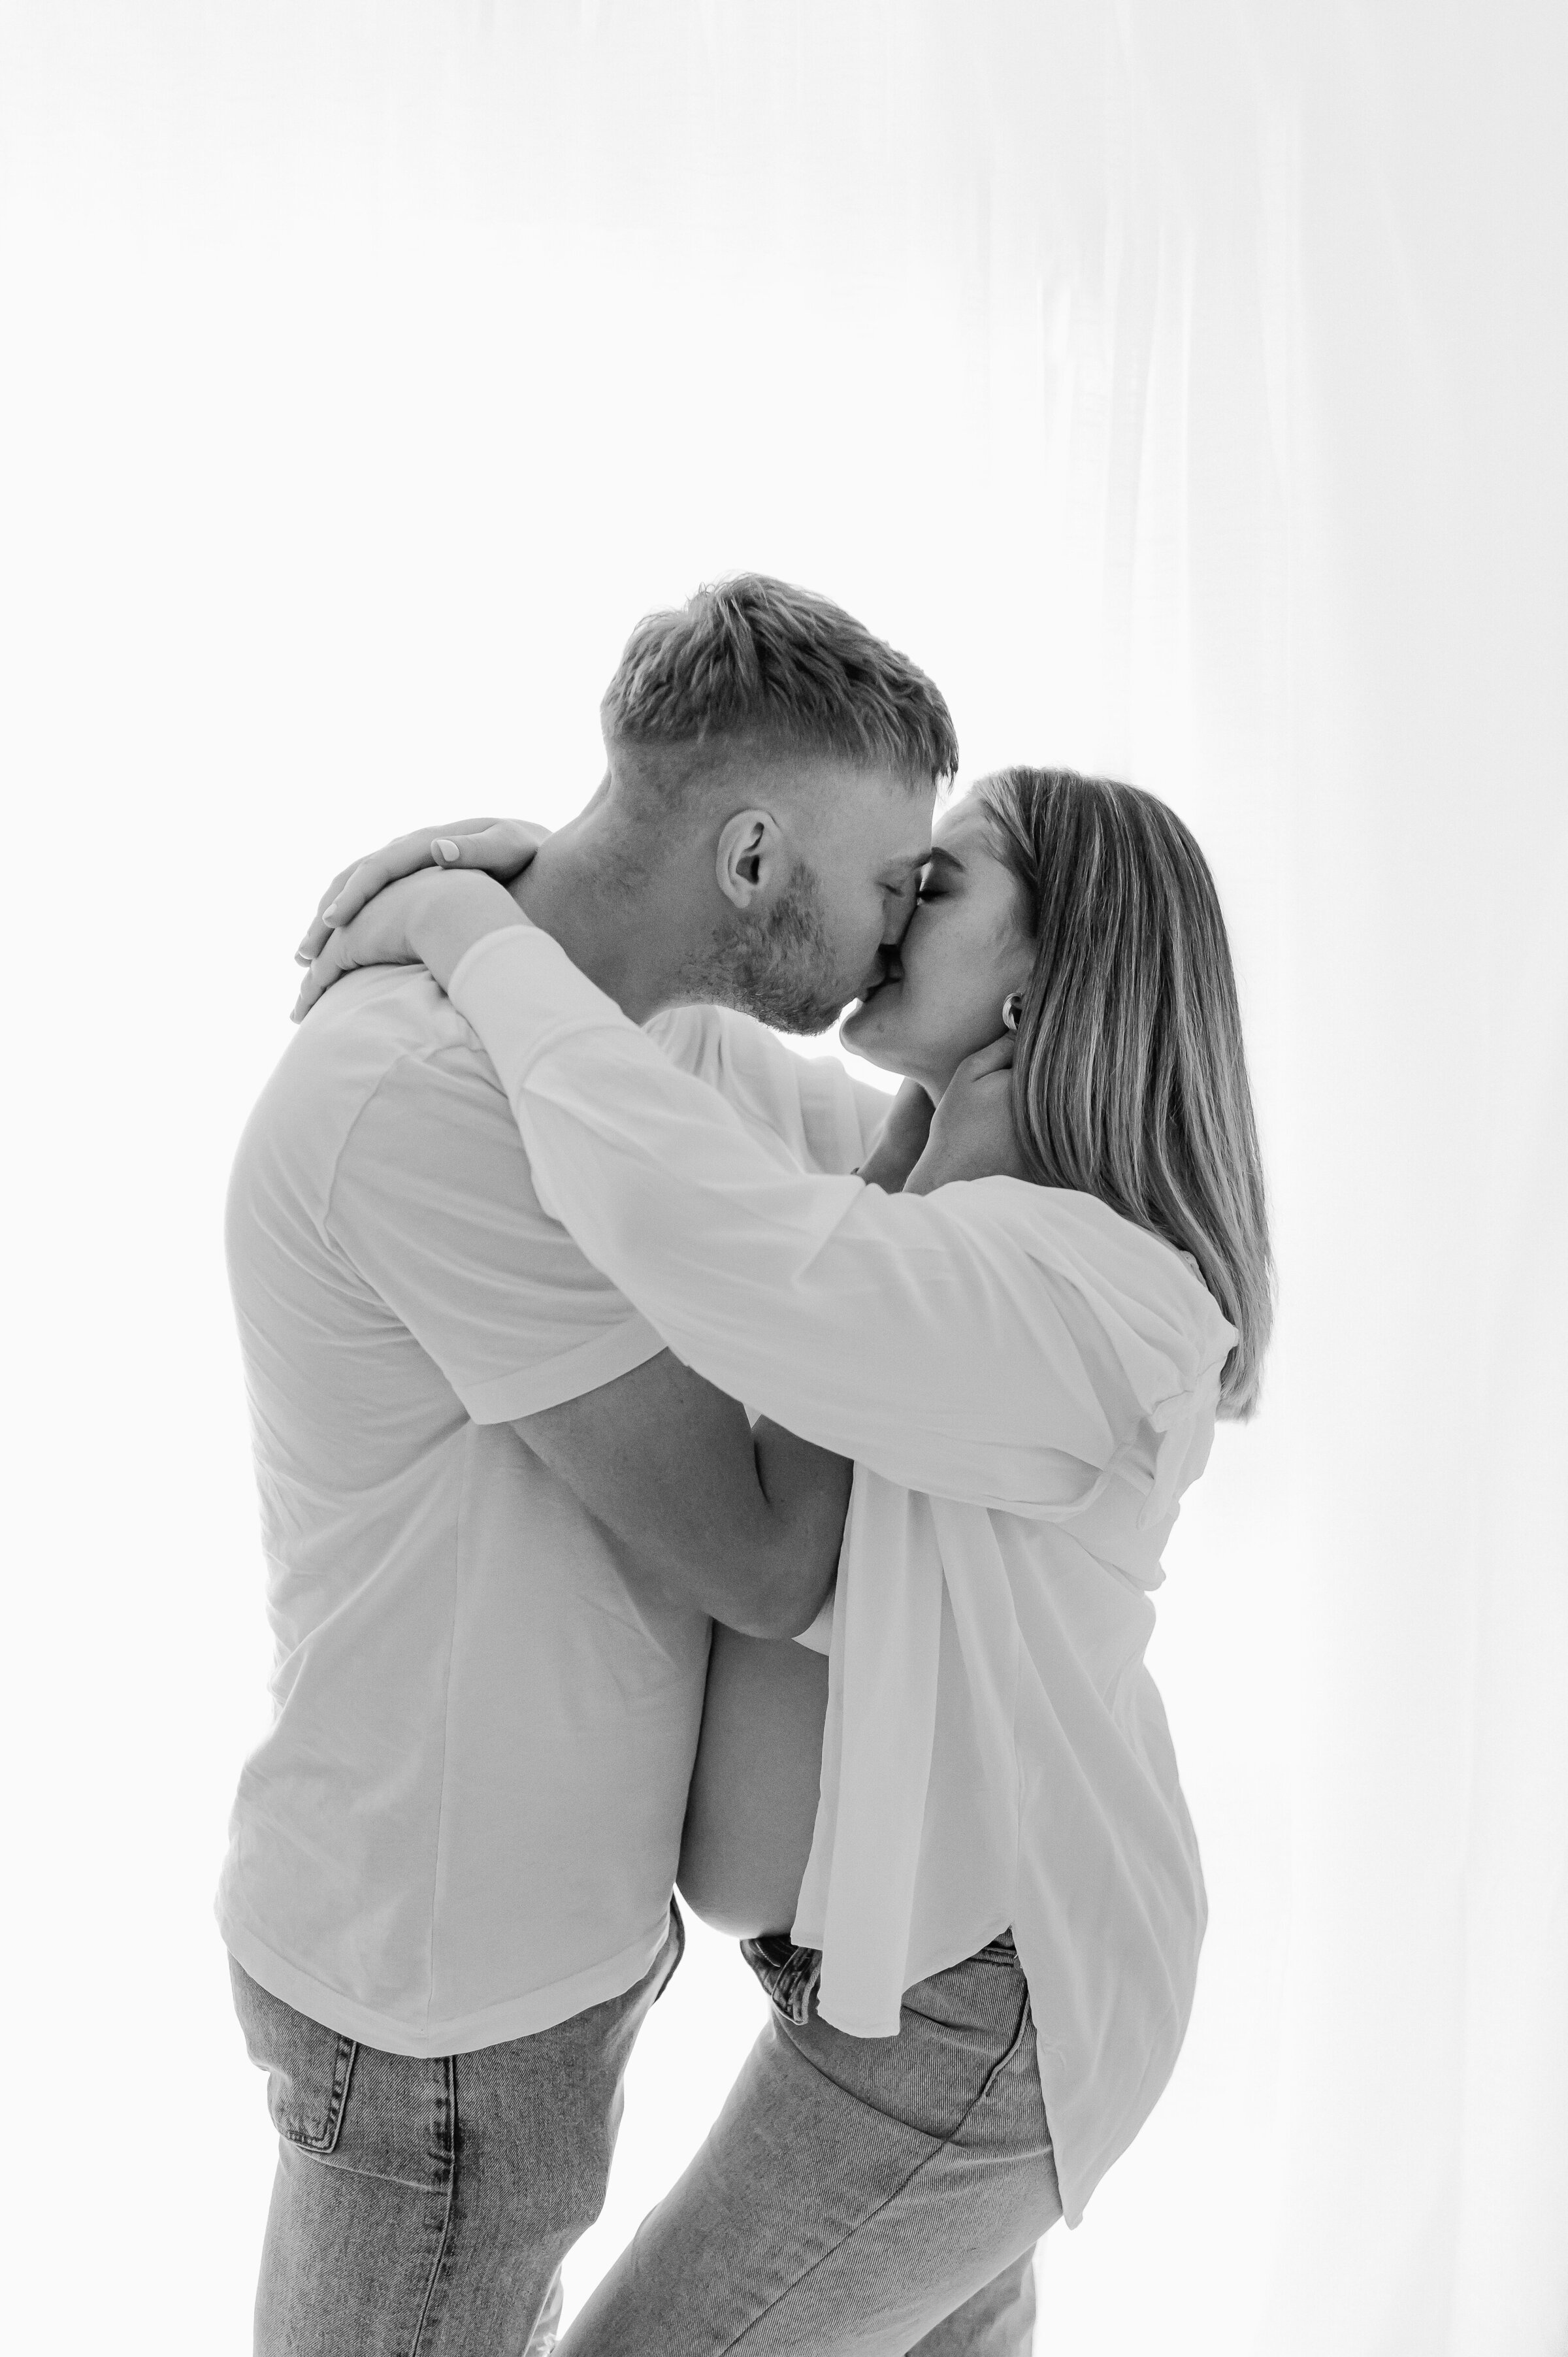 Mum to be maternity photo with Dad kissing